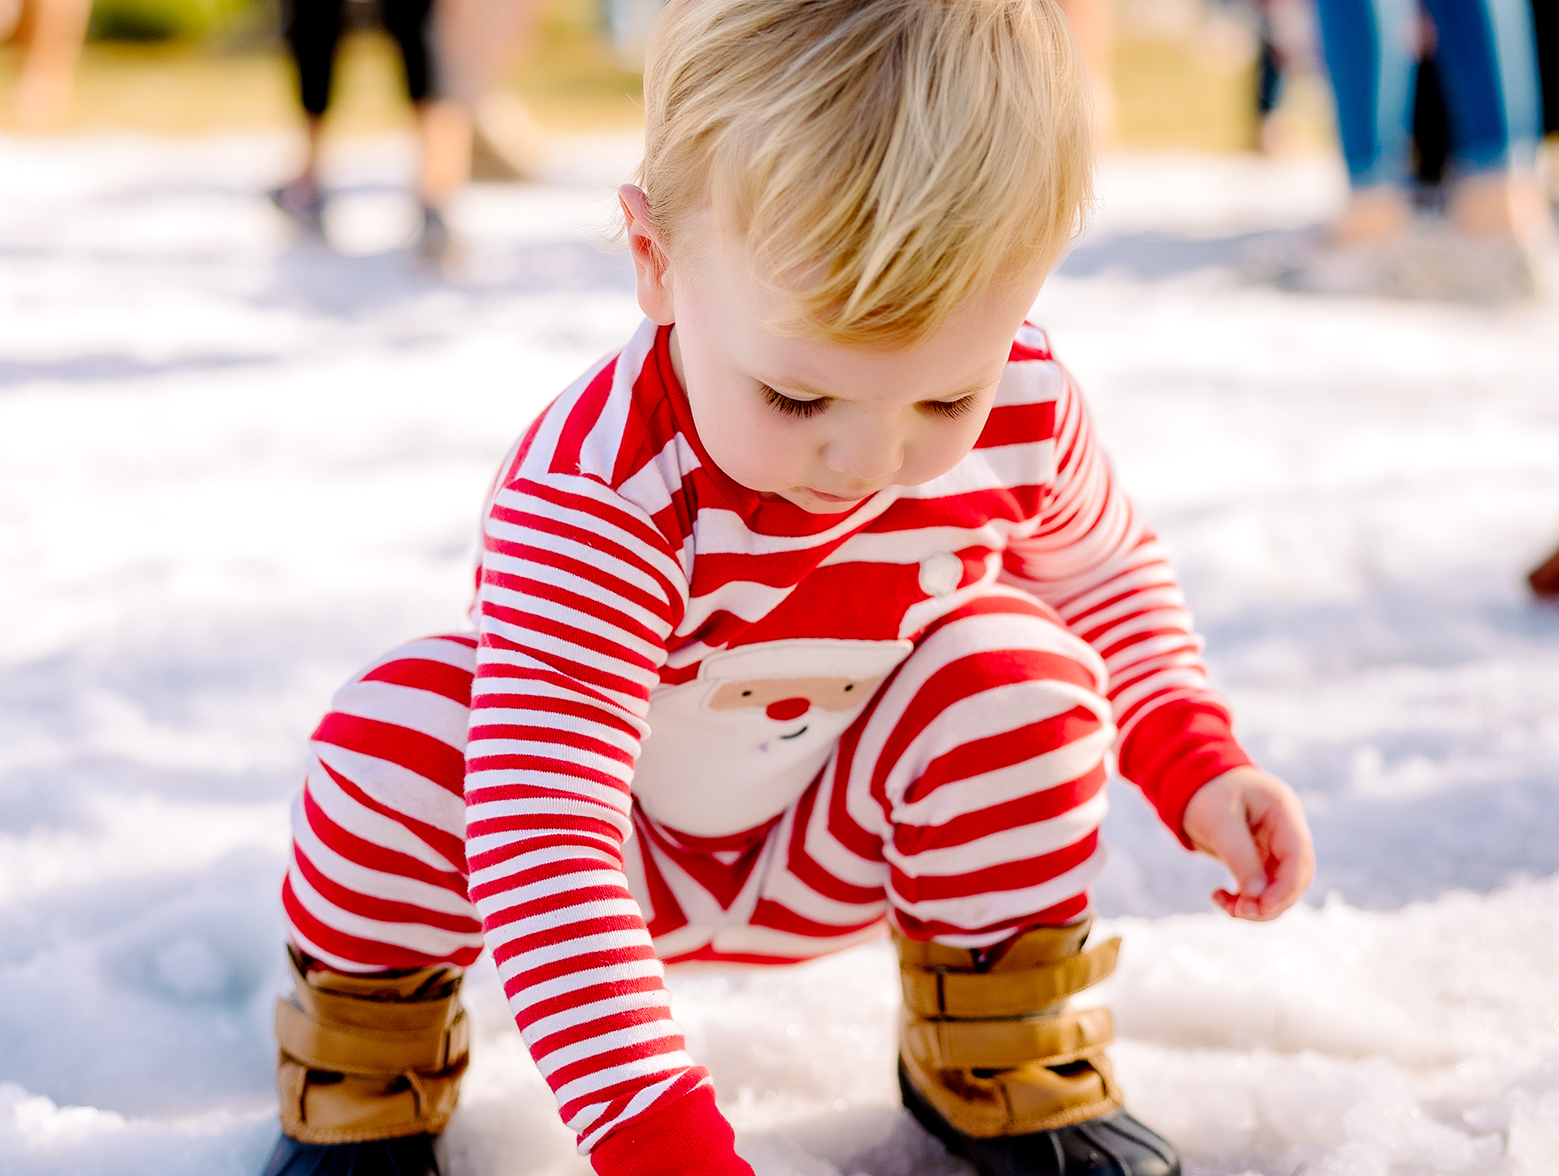 Child in Christmas pajamas and boots plays in snow at Winterfest.